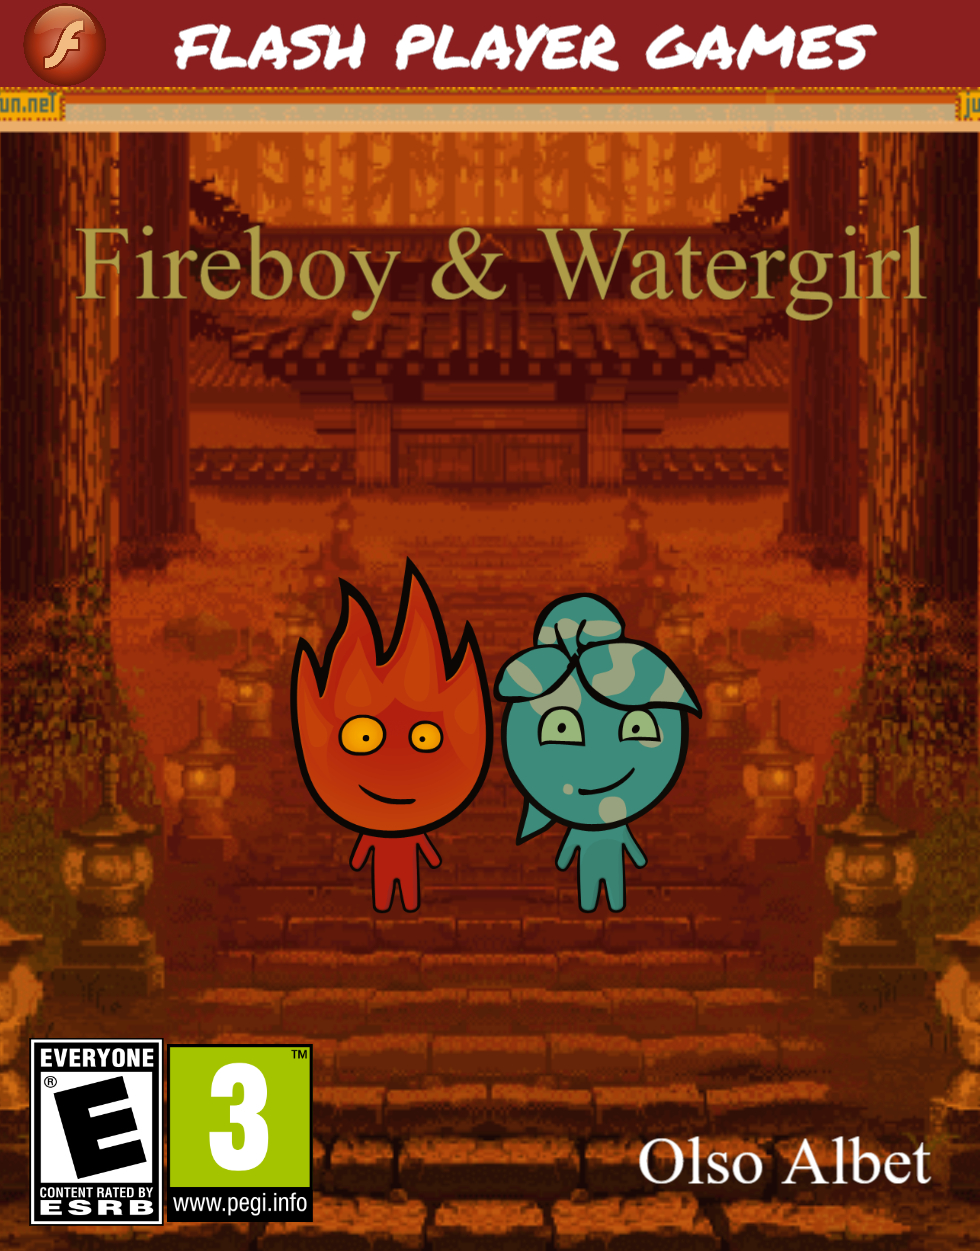 fireboy-watergirl-in-the-forest-temple-details-launchbox-games-database